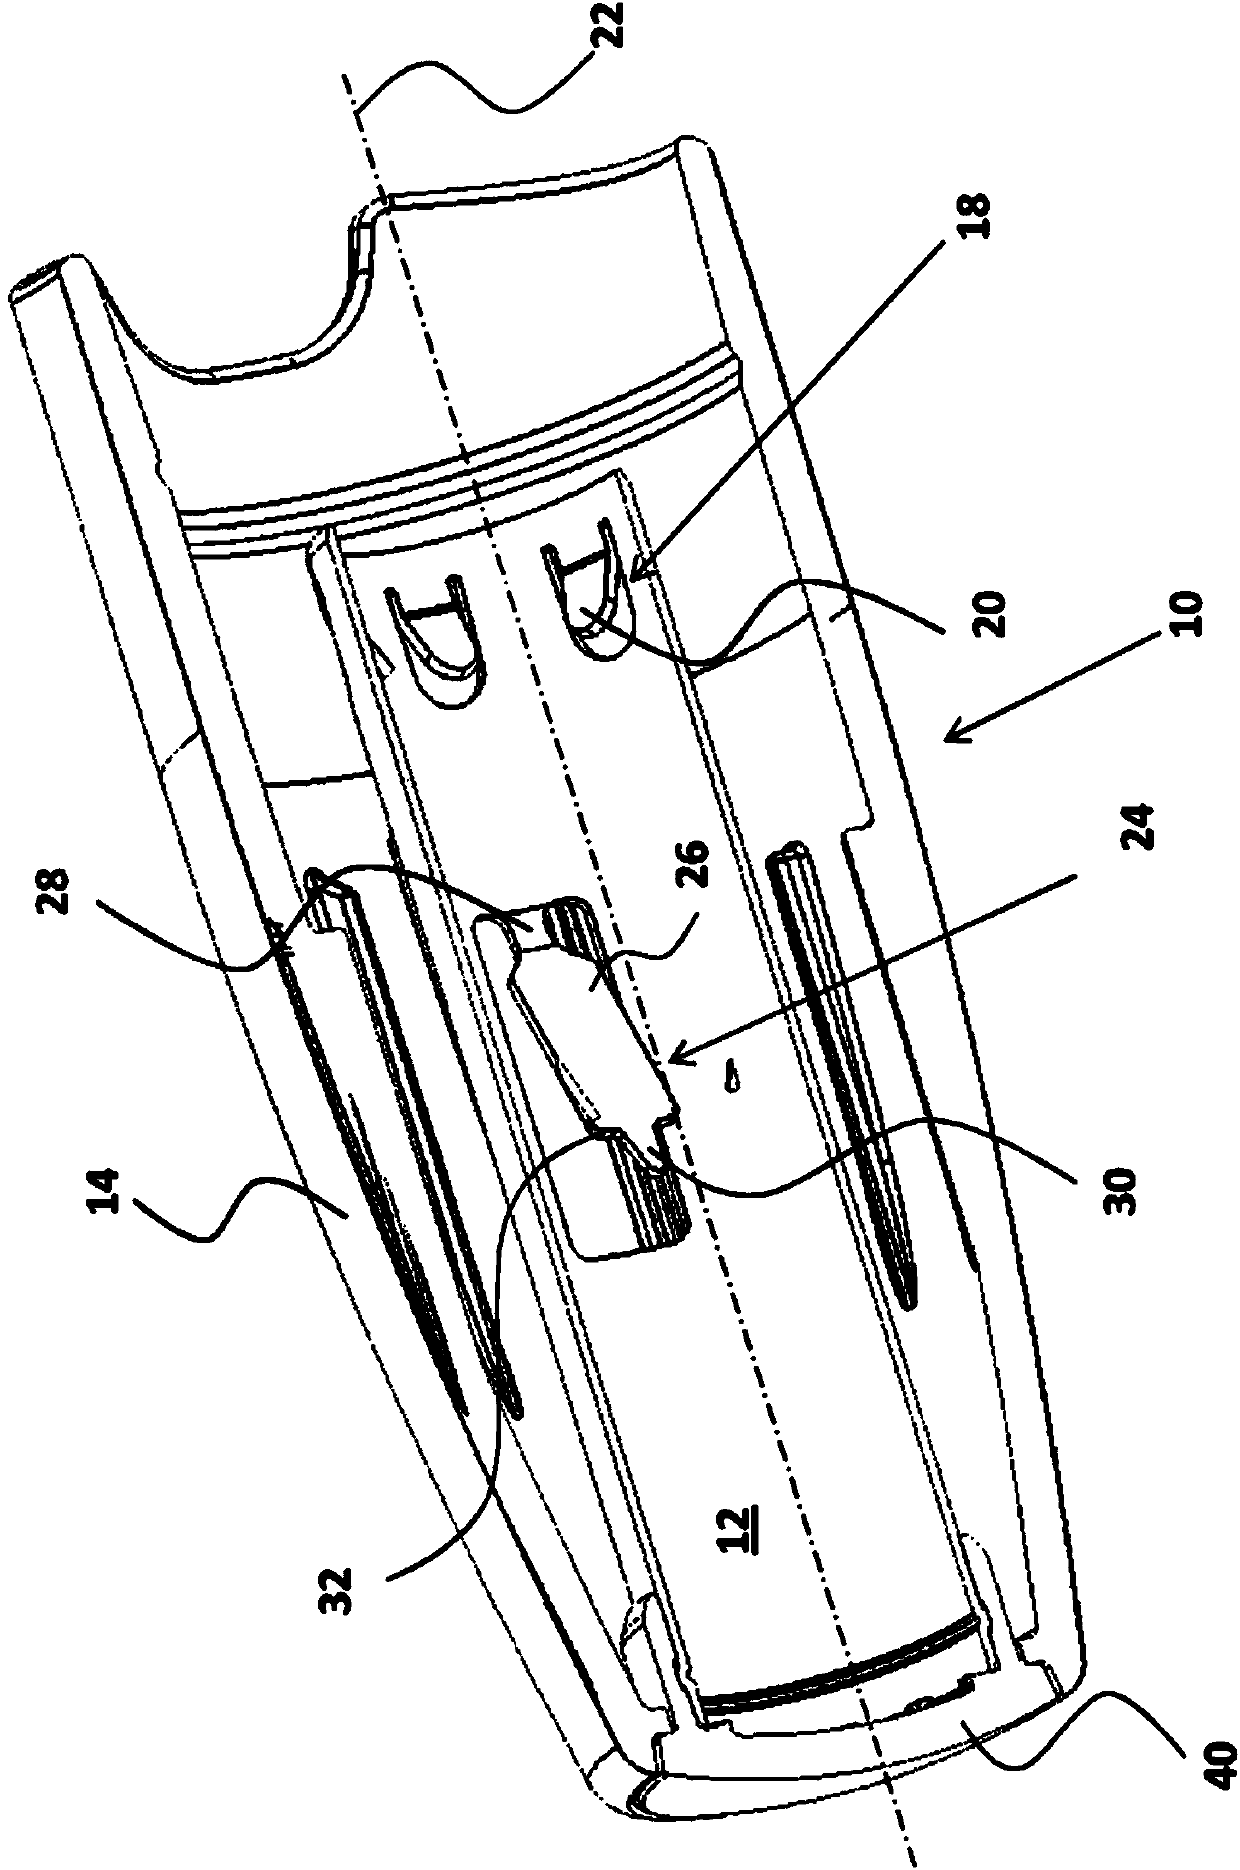 Device for removing delivery member shields